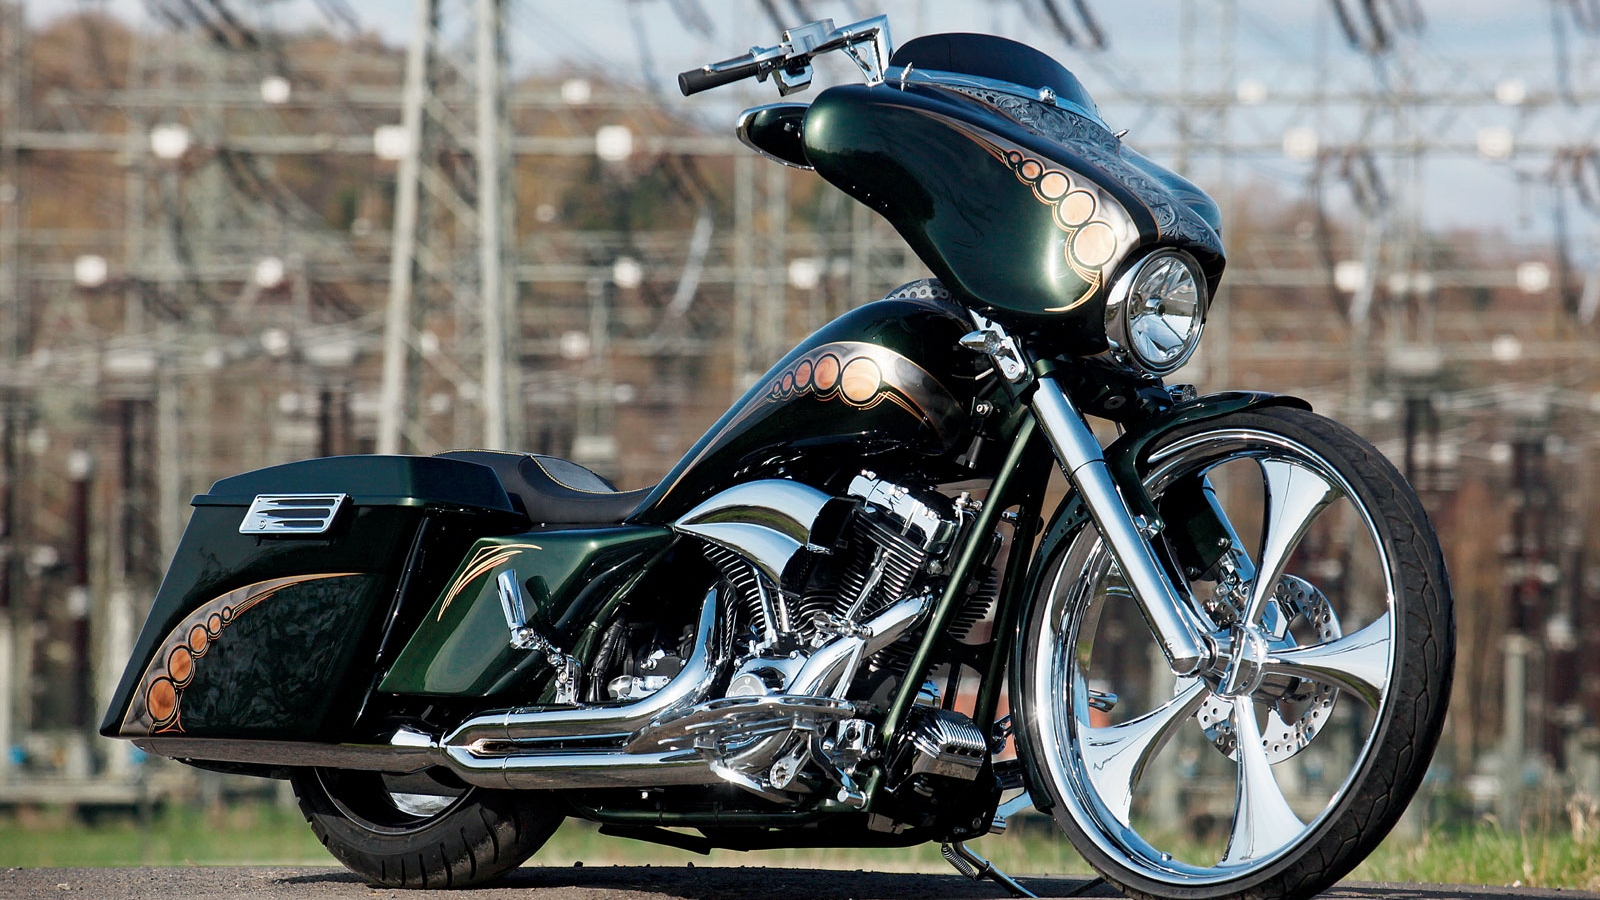  Pictures free harley davidson skull wallpaper download the free harley